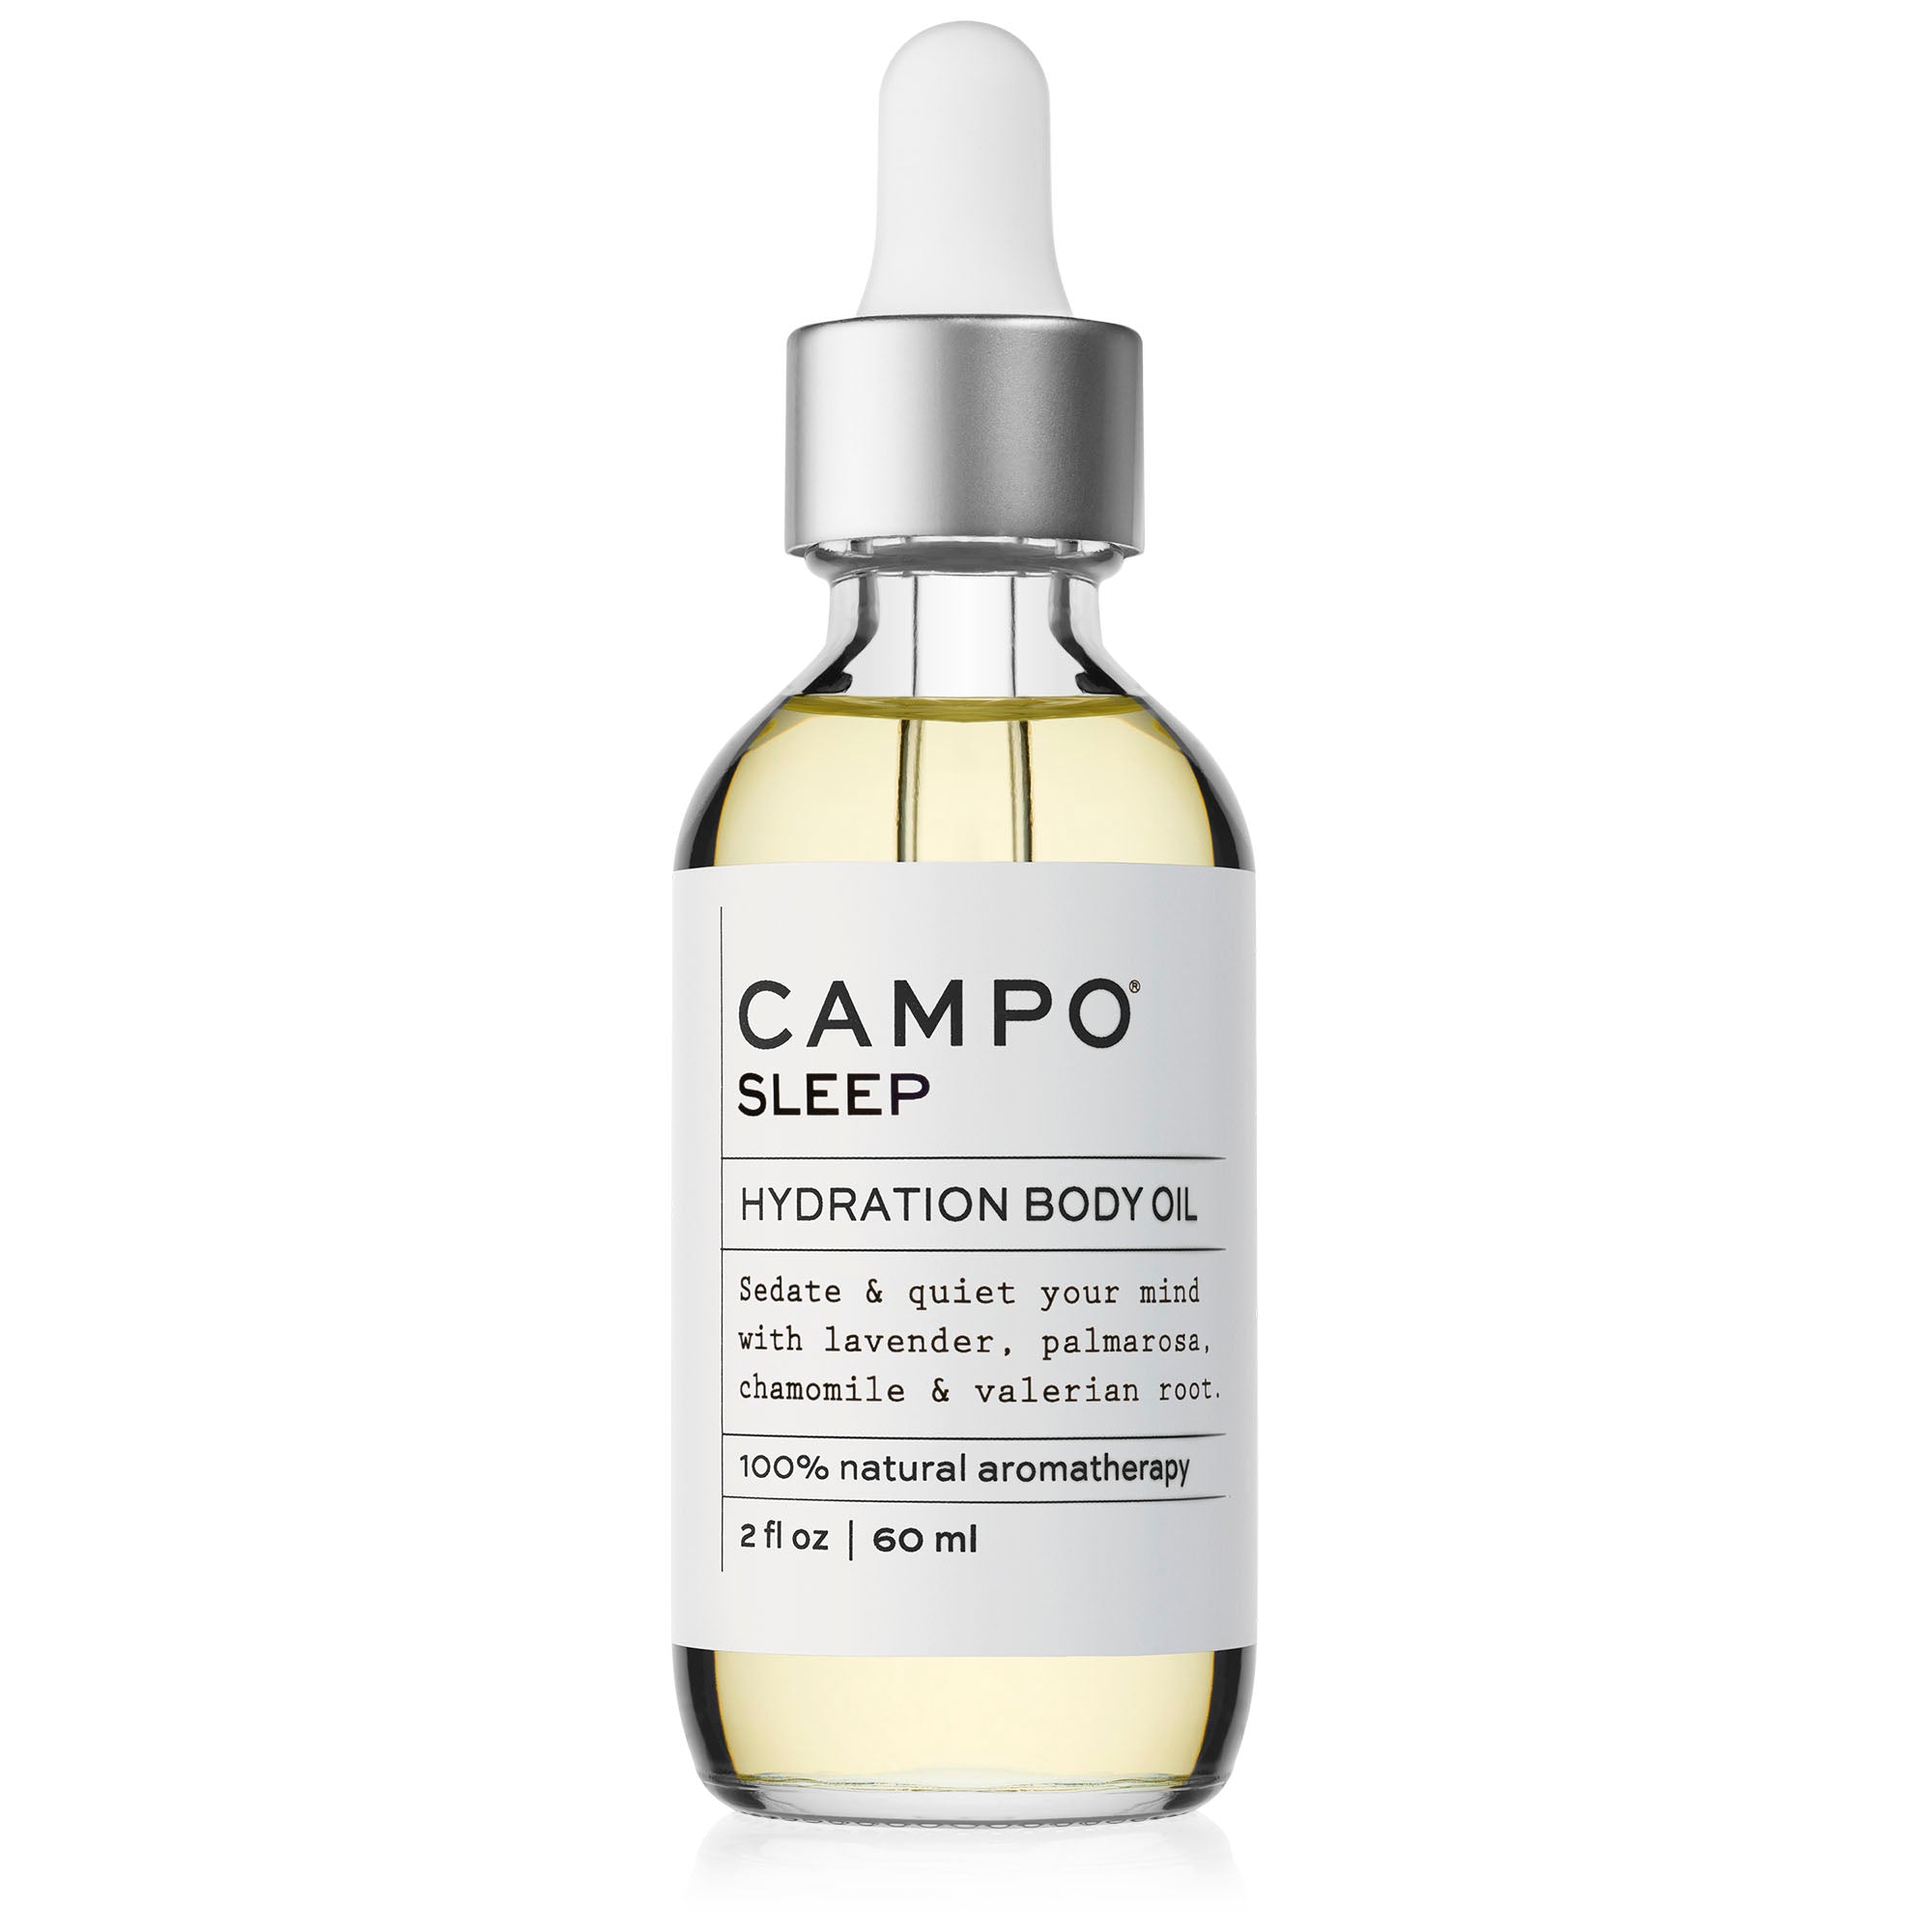 Campo Beauty Hydration Body Oil - SLEEP Blend that in 60 ml. Fall into a deep sleep with this 100% natural essential oil roll-on blend of French Lavender, Palmarosa, Roman Chamomile, and Valerian Root.  Gives your skin an infusion of nourishing & deep hydration.